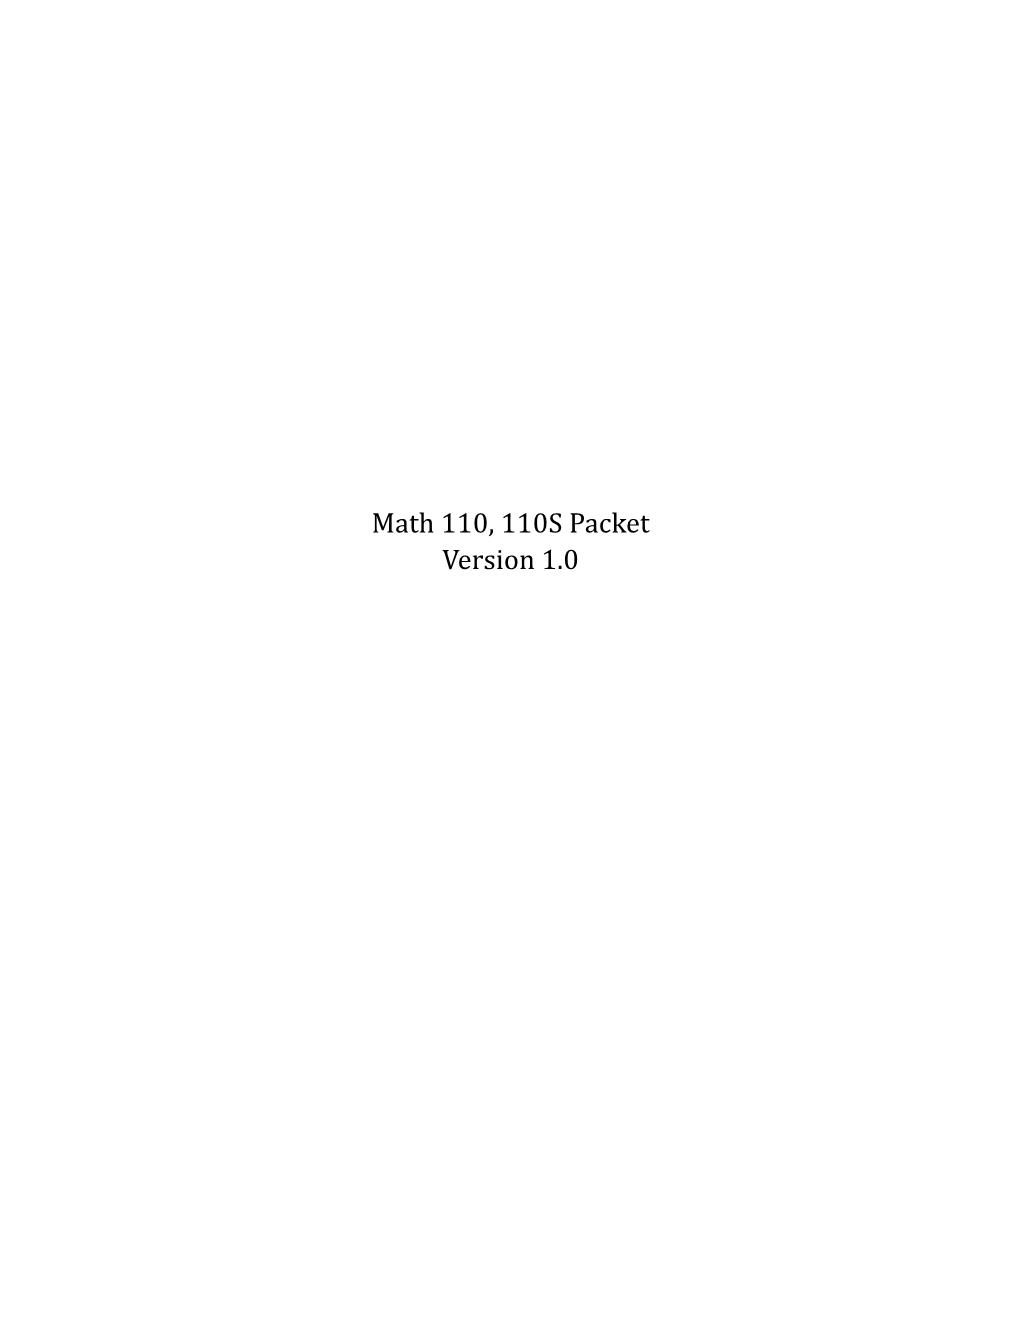 Math 110, 110S Packet Version 1.0 This Work Is Licensed Under the Creative Commons Attribution-Noncommercial-Sharealike 4.0 Inter- National License